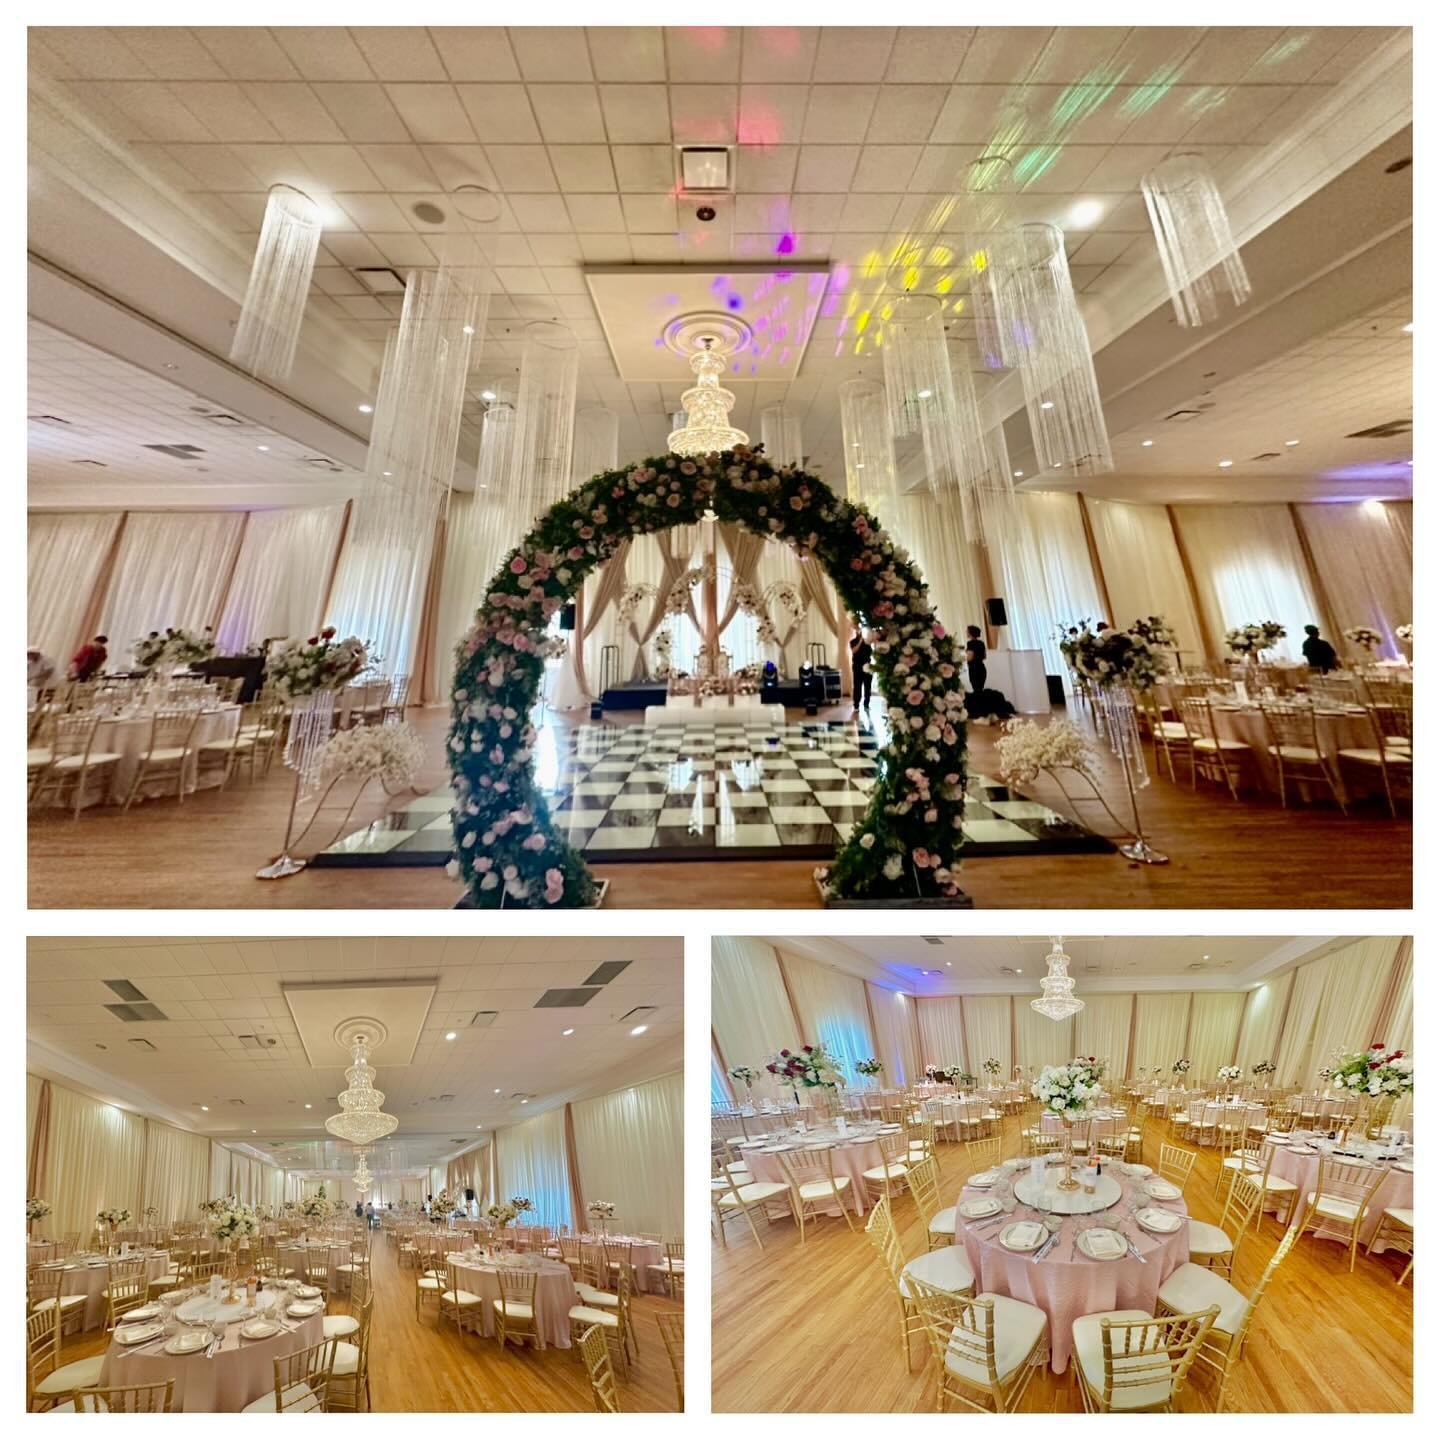 Beautiful lux wedding at the Regent. We provided the Full Room Draping (Ivory Drapes + Champagne Drape Pole Caps) &amp; 460 Gold Chiavari Chairs w/Ivory Cushions. Pleasure working with Janova Events, Events Done Right, Hao Wah Restaurant, Lux Decor, 